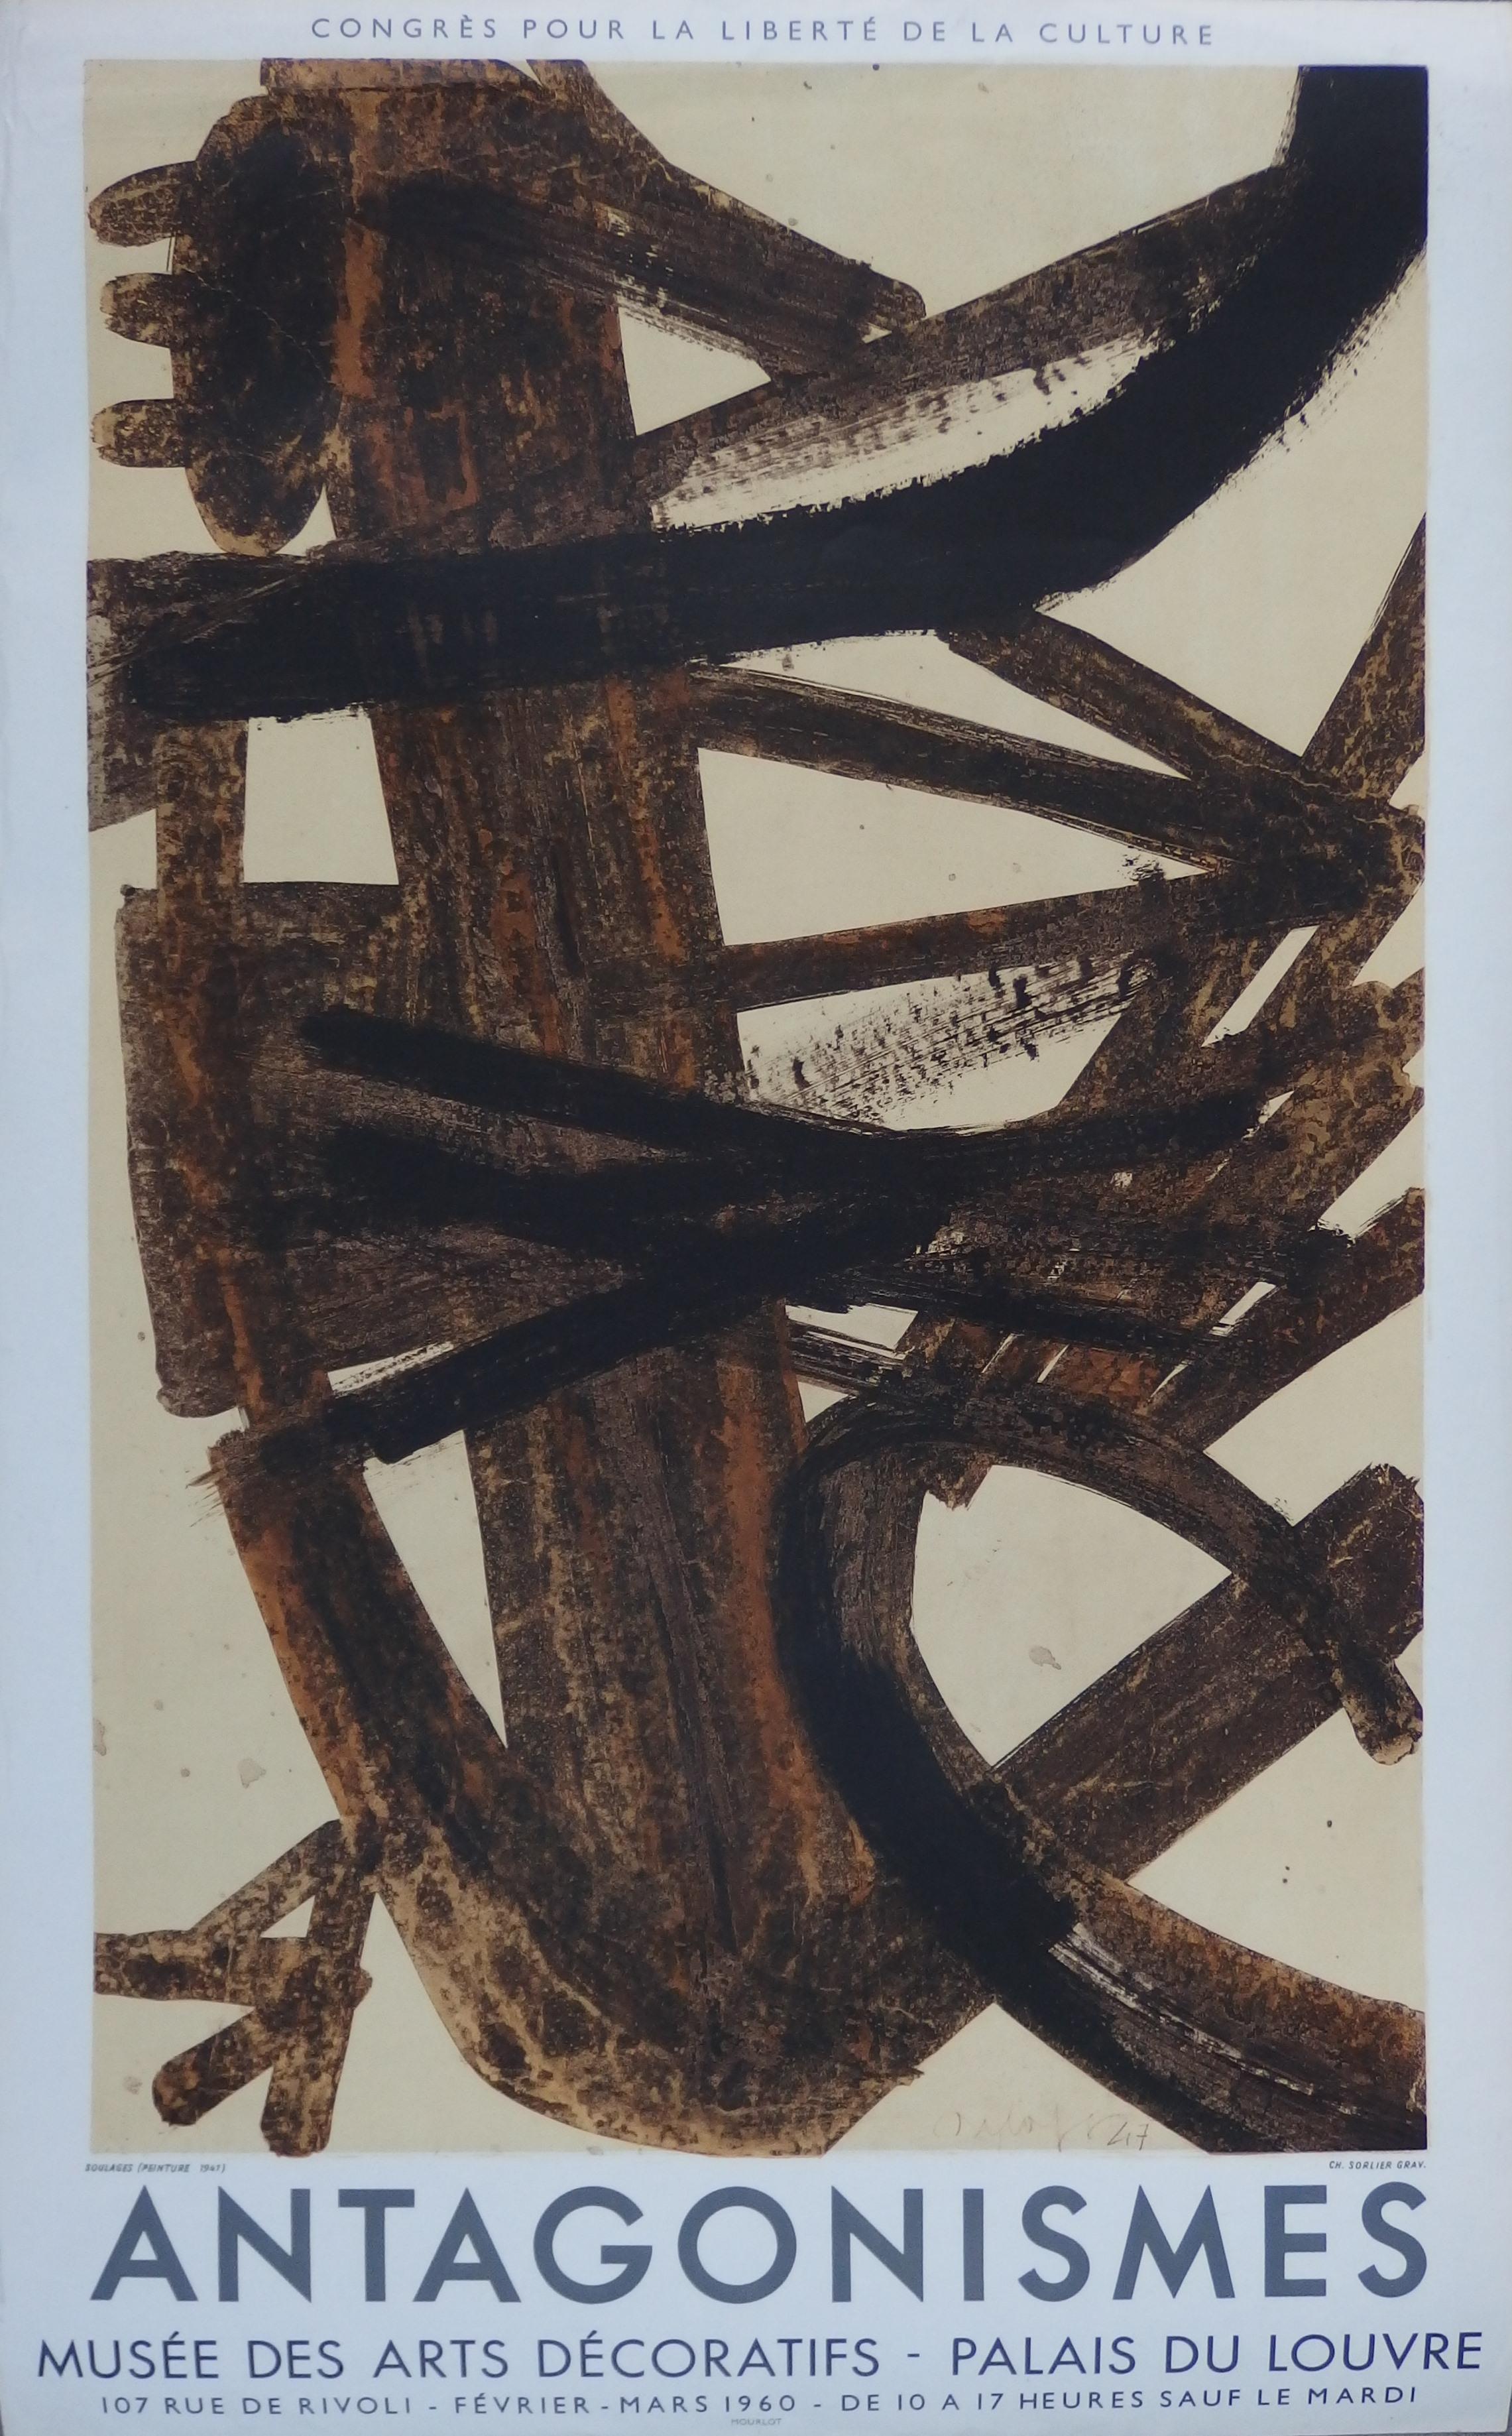 Pierre Soulages Abstract Print - Antagonism (Nut Husk Drawing) - Orignal lithograph, Mourlot 1960